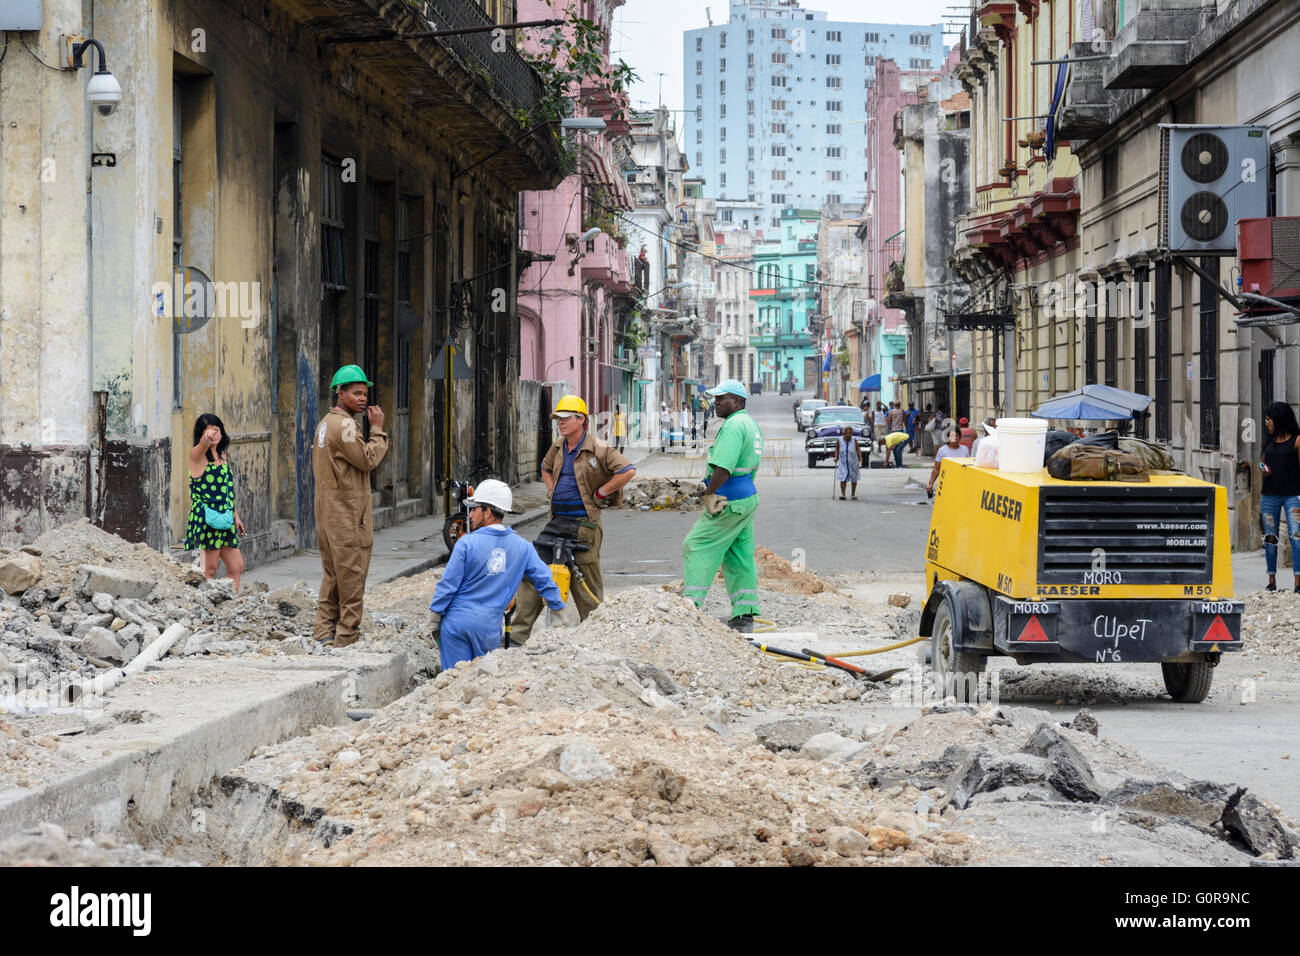 Workmen digging trenches in Old Havana to lay new electricity and water supplies, Havana, Cuba Stock Photo